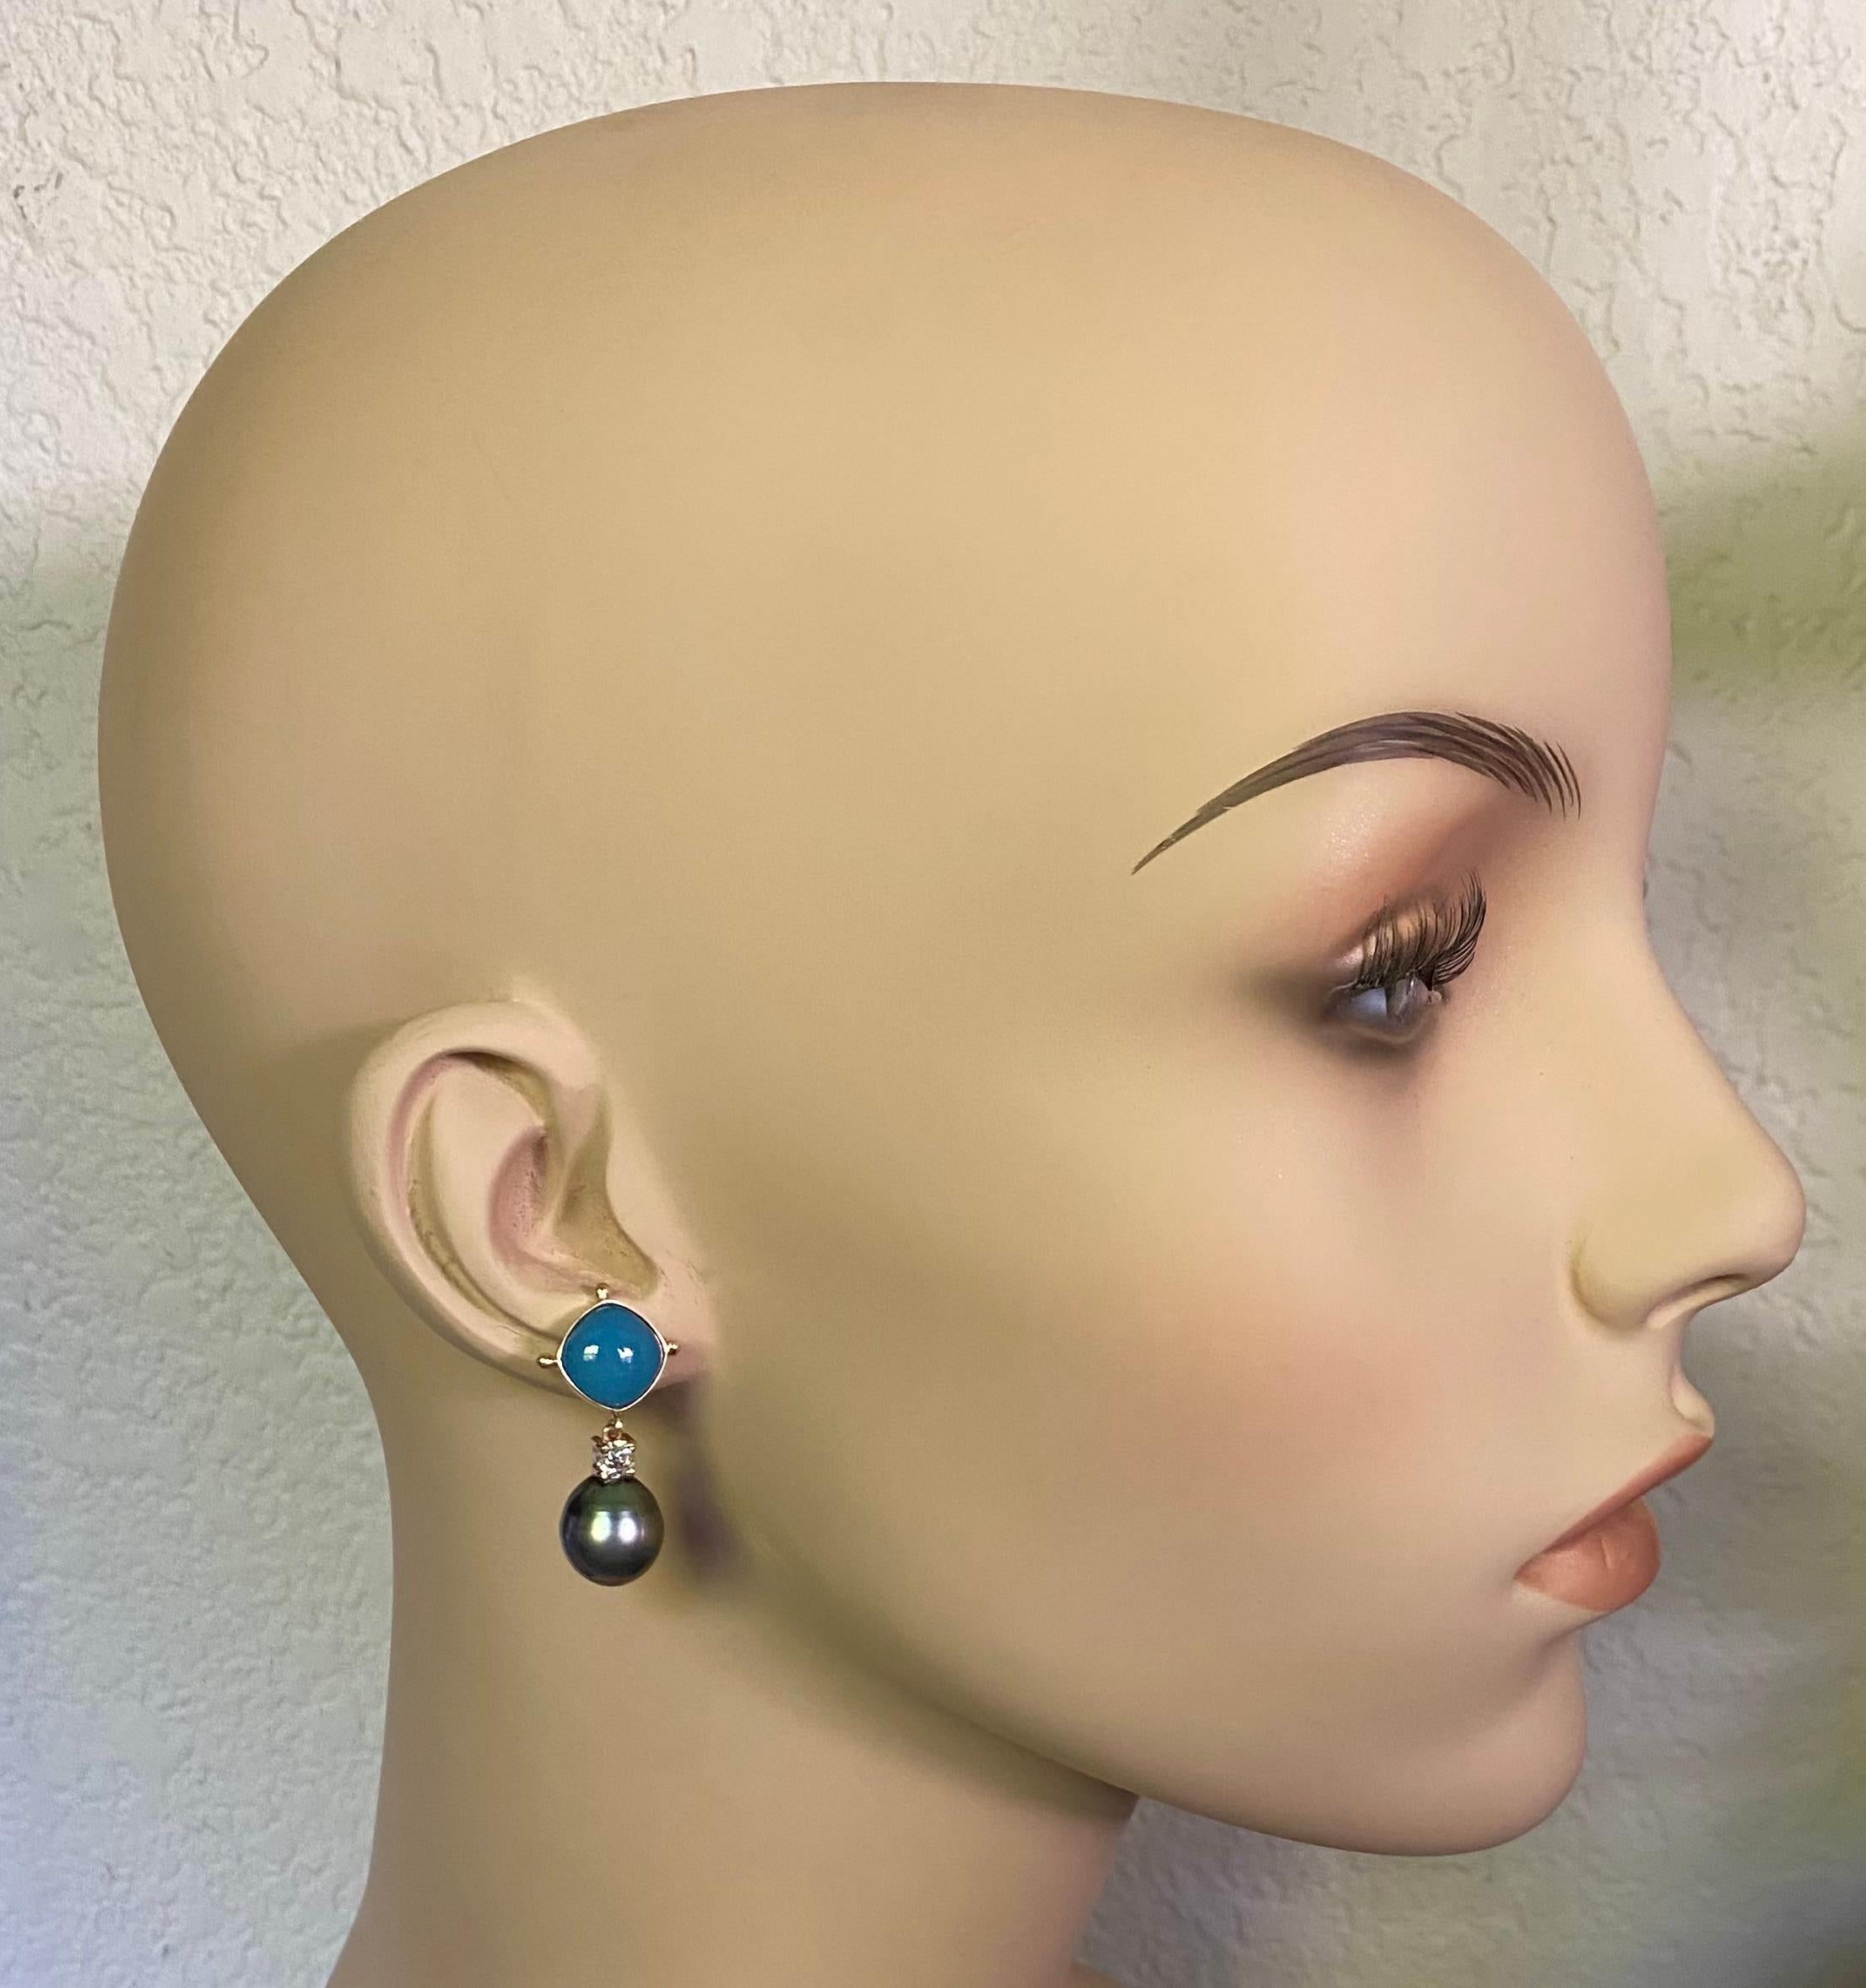 Blue chalcedony is paired with Tahitian pearls is these simply elegant dangle earrings.  The 10 x 10 mm cushion shaped chalcedony are well polished and perfectly matched.  The Tahitian pearls are slightly pear shaped with an iridescent rainbow of